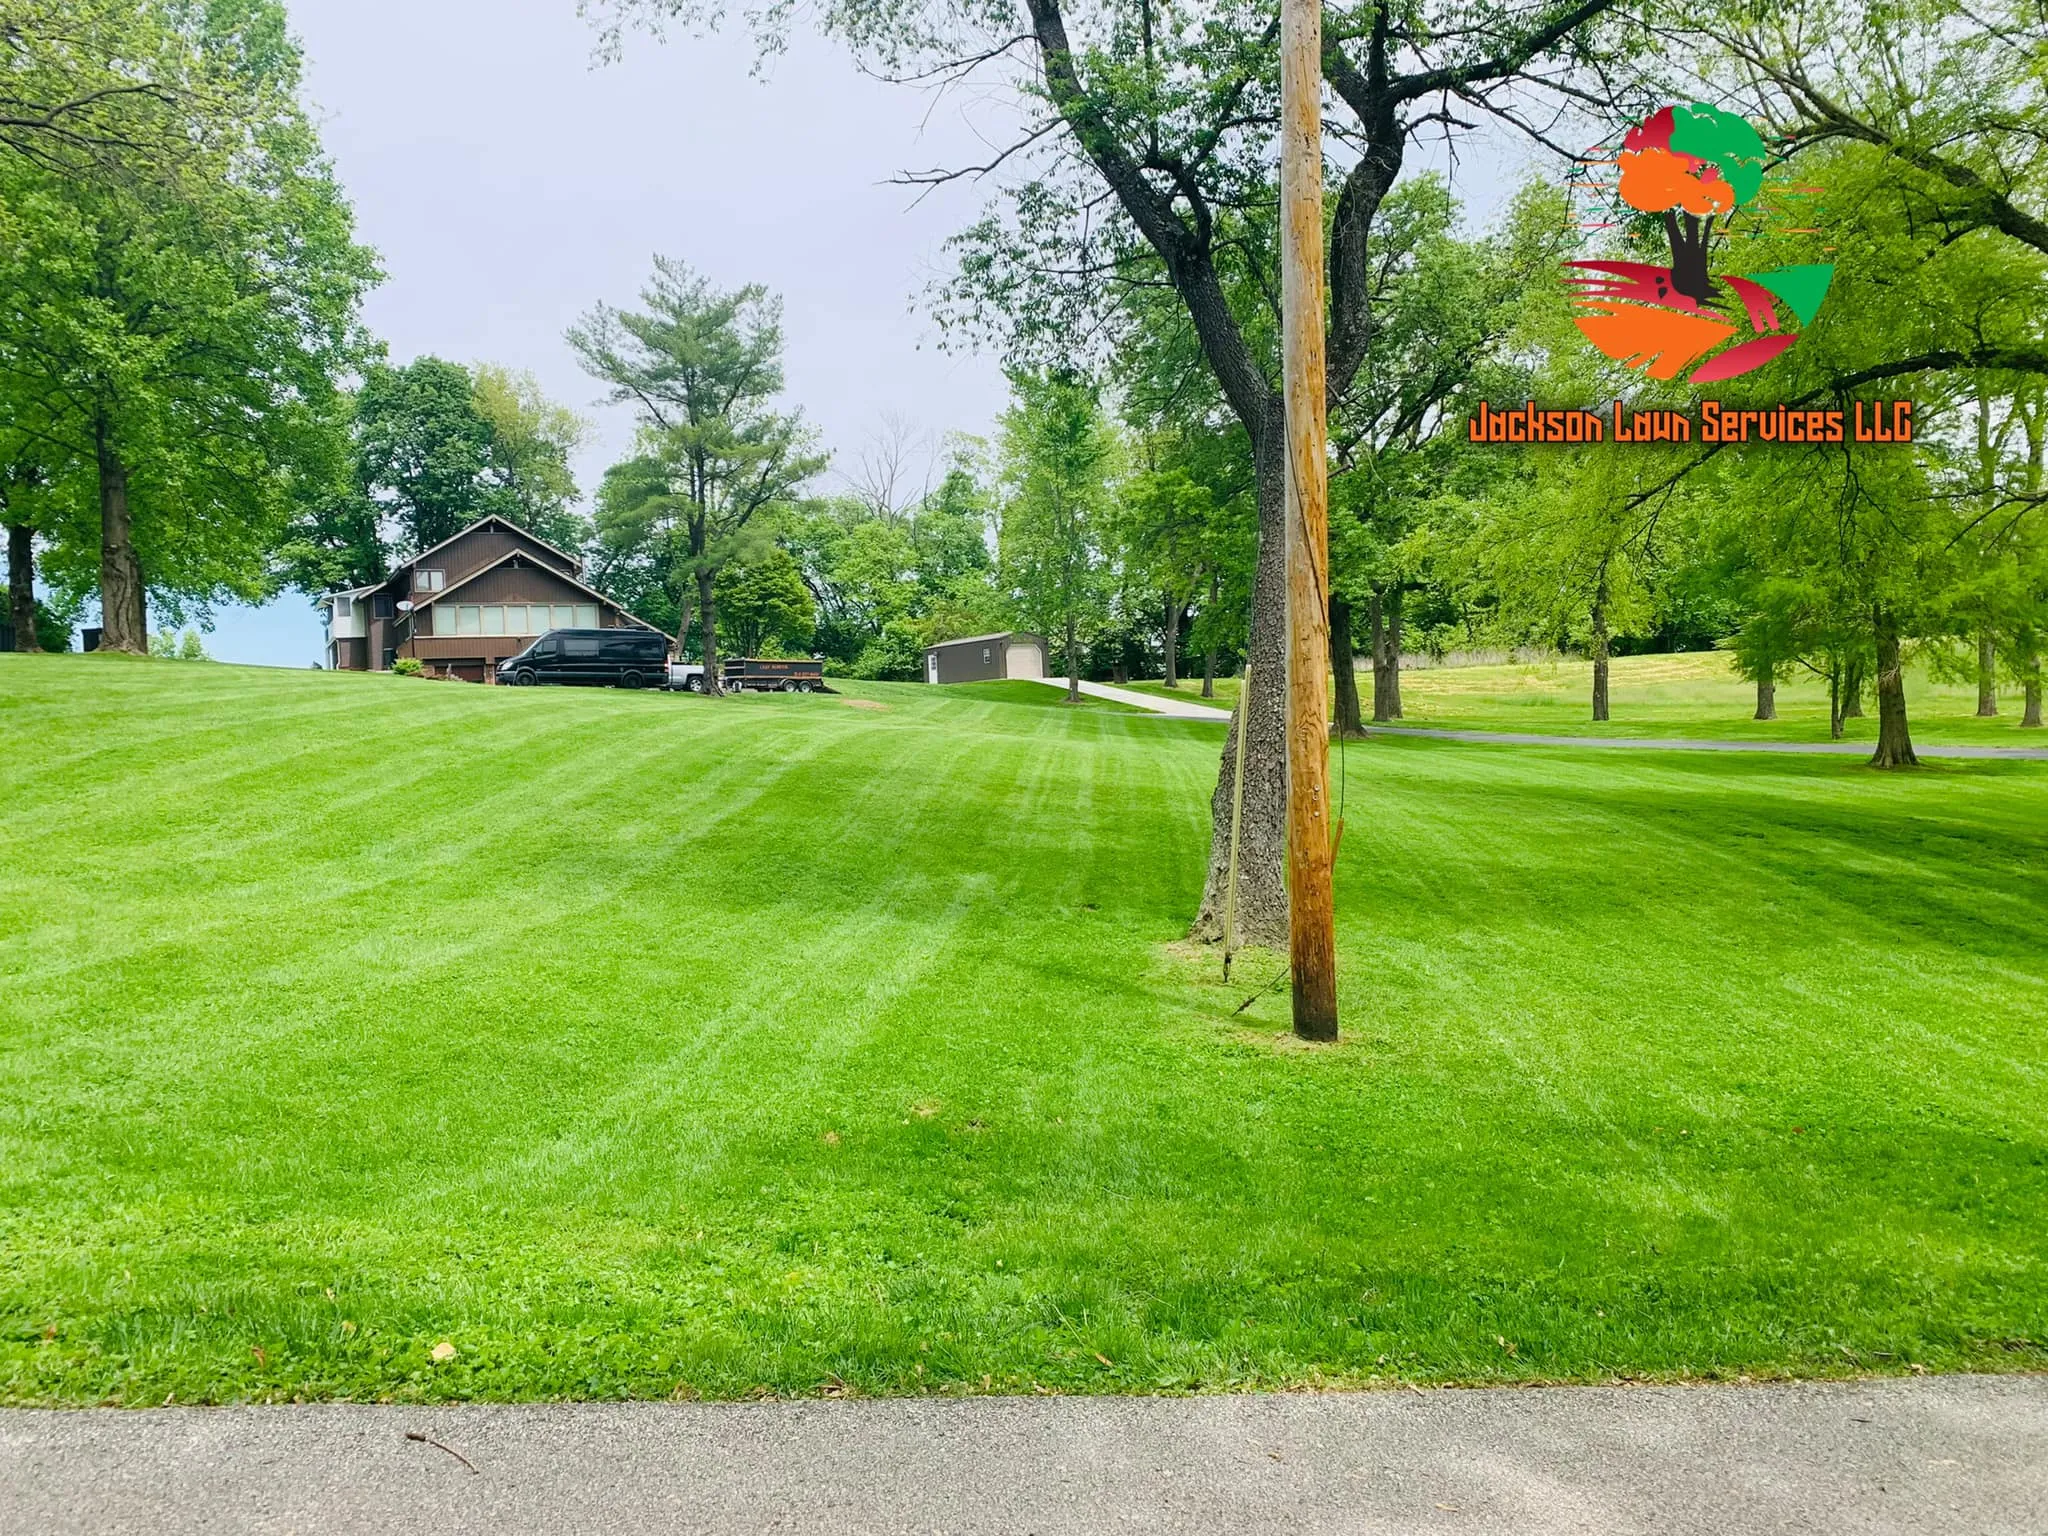 Lawn Maintenance for Jackson Lawn Services LLC in Florissant , MO